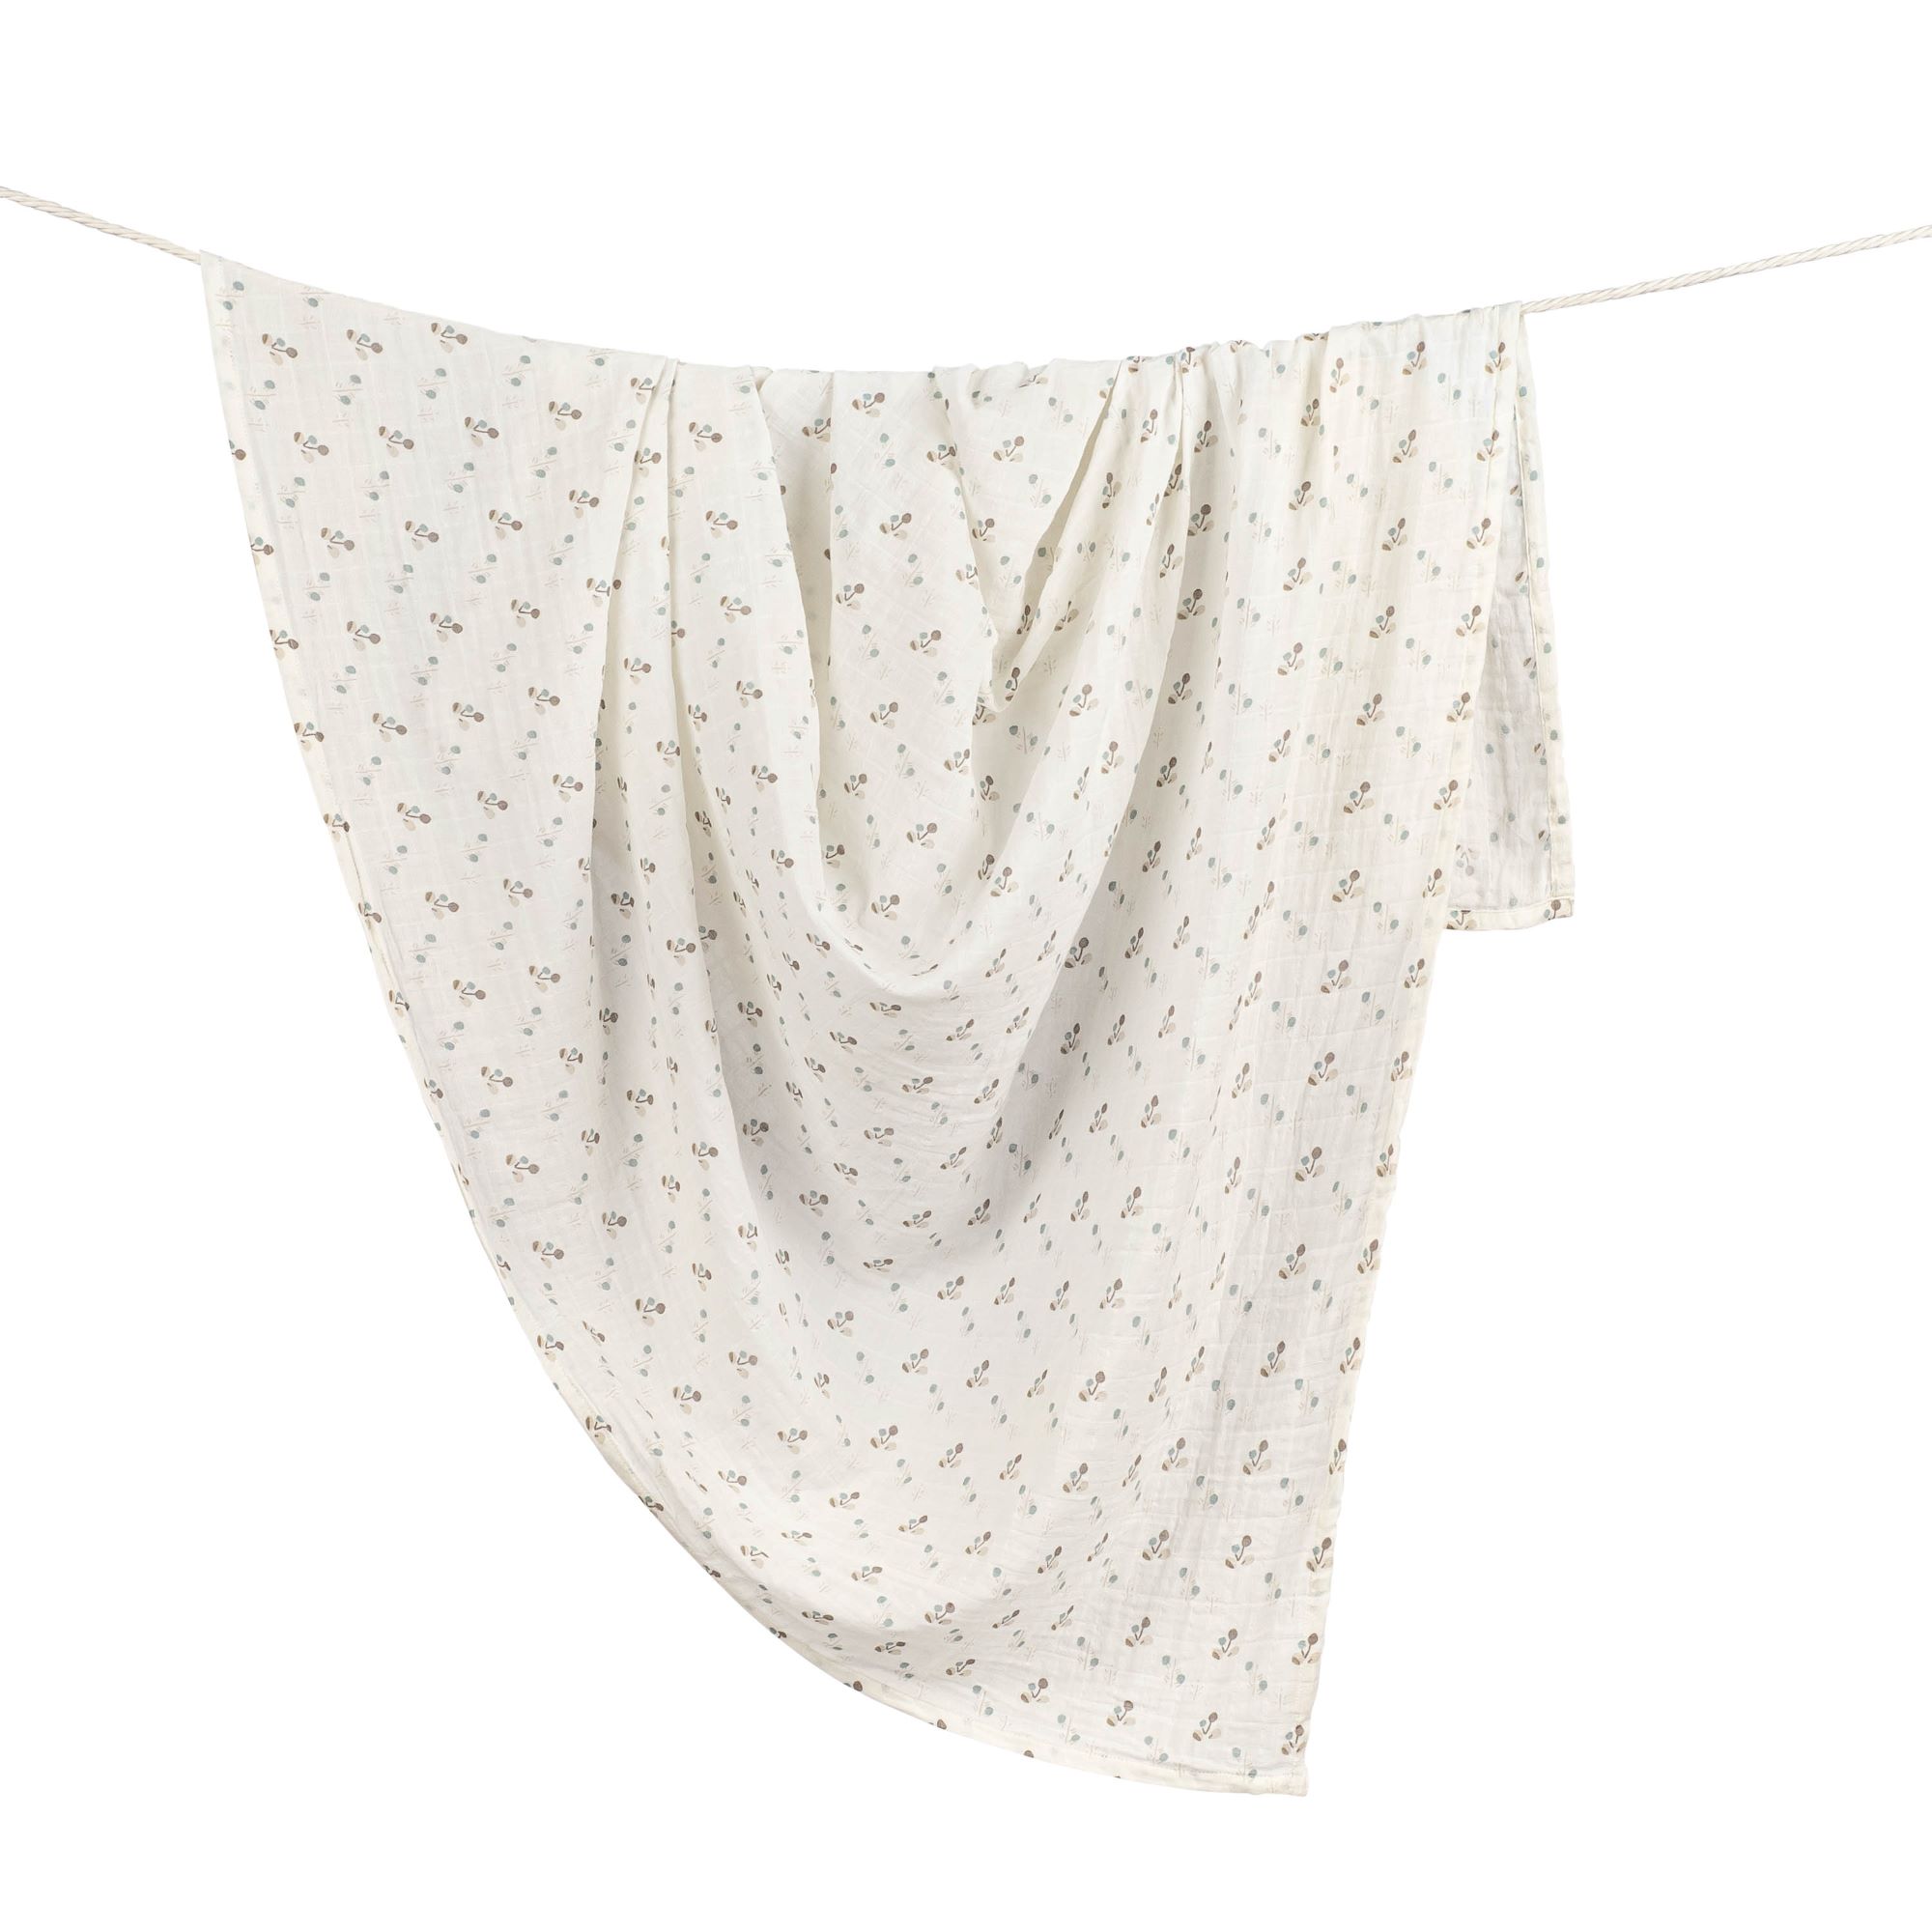 Baby swaddle hanging on clothesline